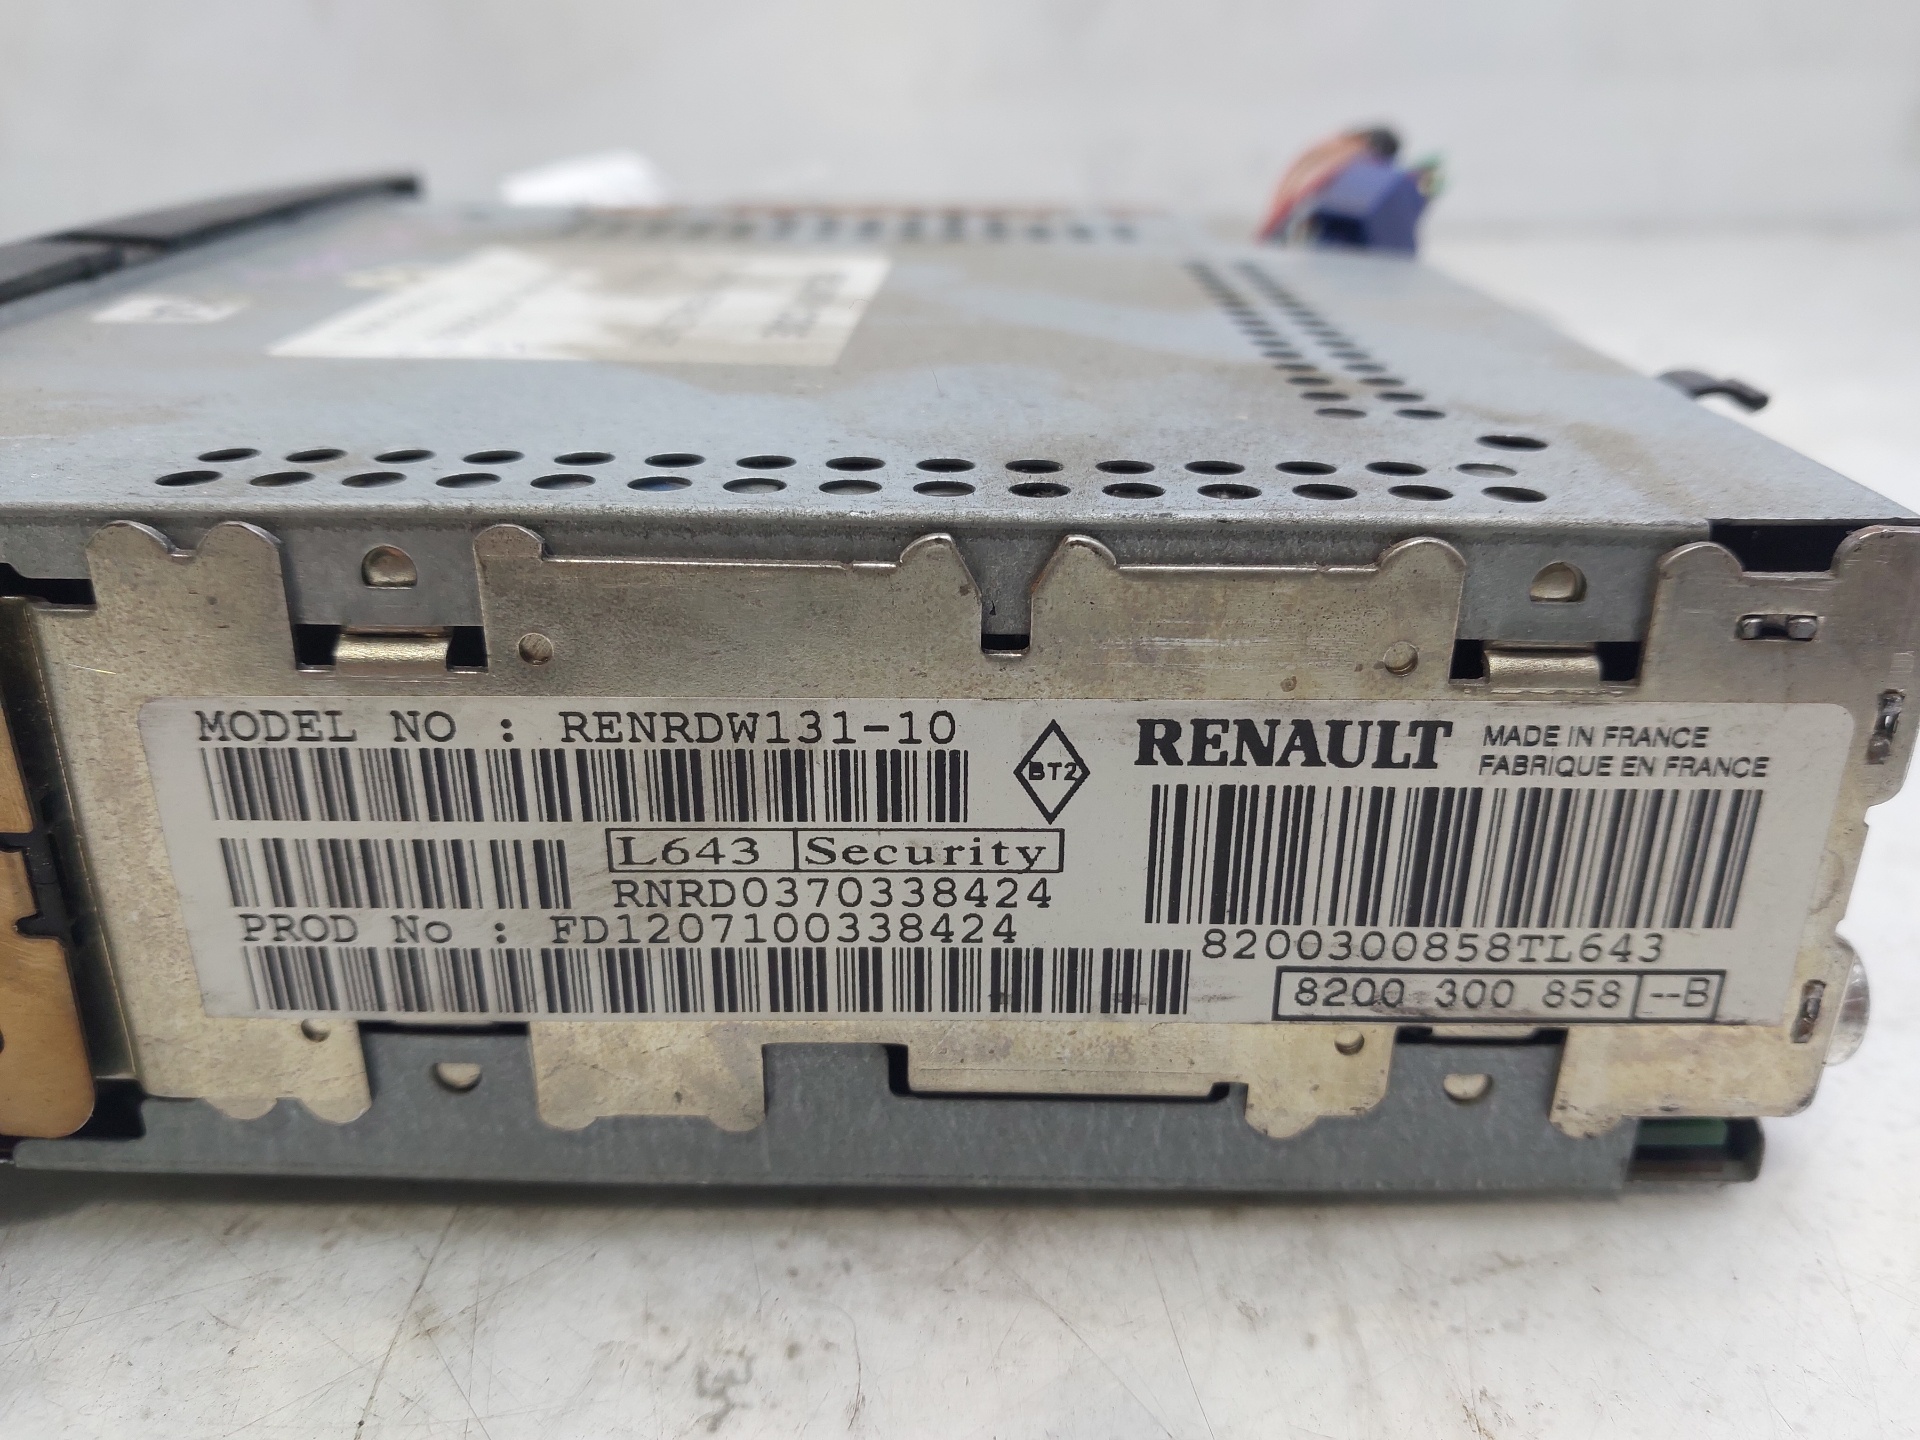 RENAULT Scenic 2 generation (2003-2010) Music Player Without GPS 8200300858 24260325